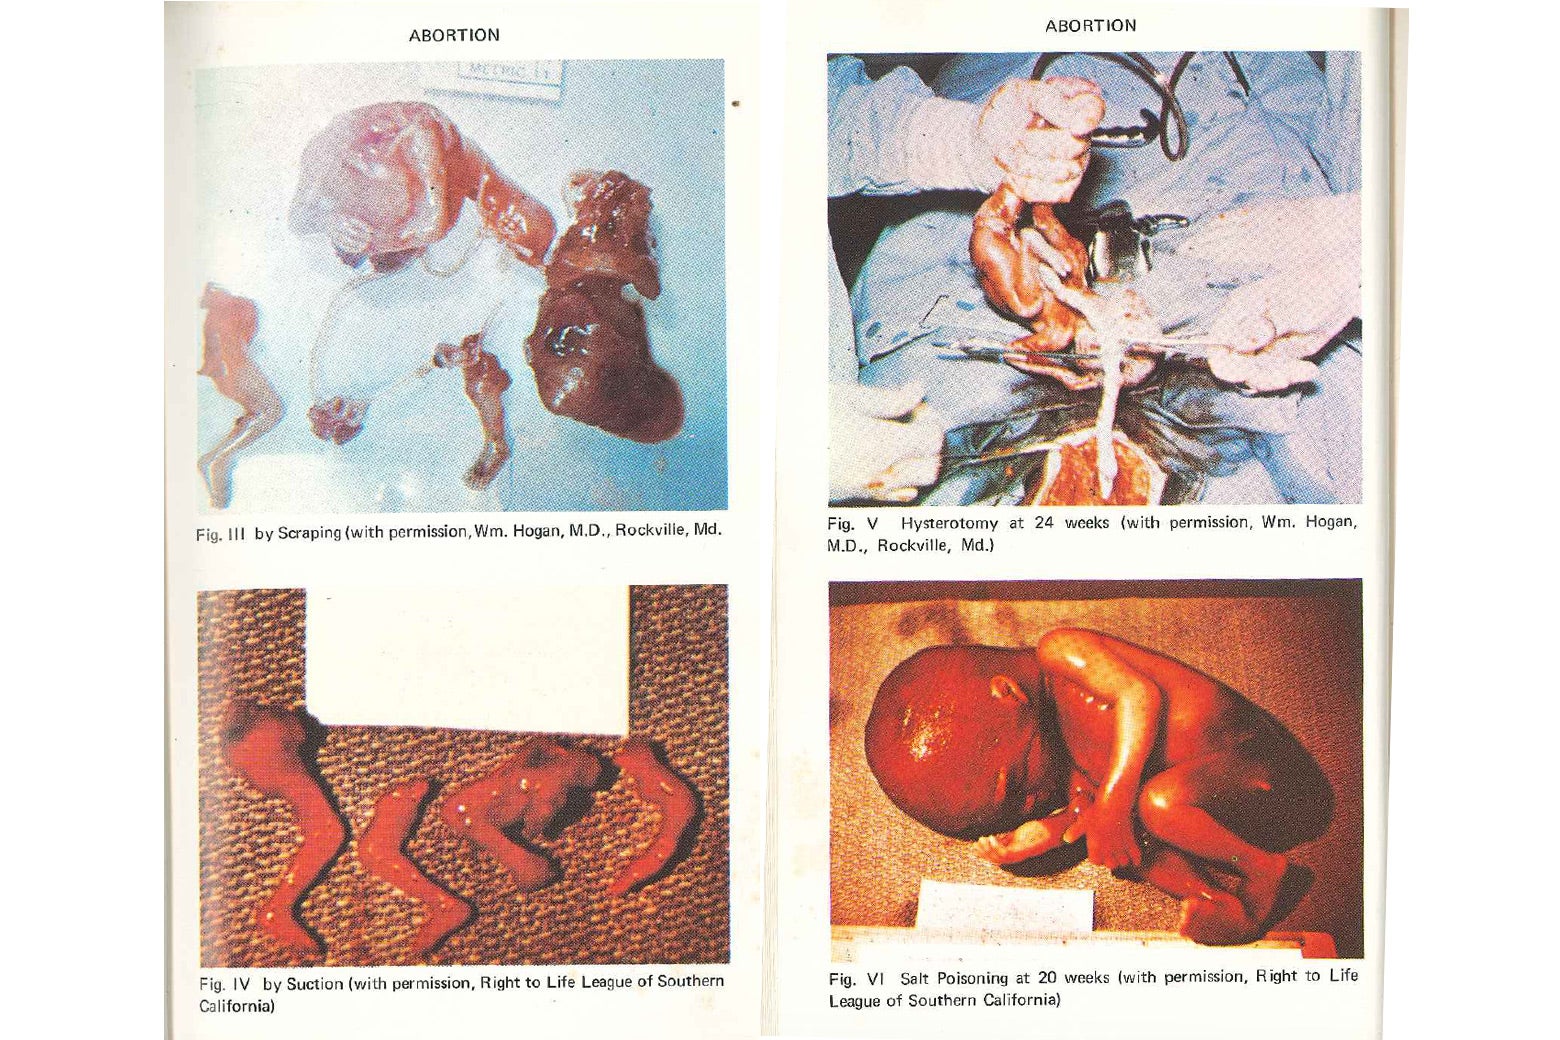 photos from the Handbook on Abortion show four different methods of abortion: By suction, by scraping, a hysterectomy, and a saline abortion. The suction and scraping abortions show dismembered parts. The hysterectomy and the saline abortion show larger fetuses.